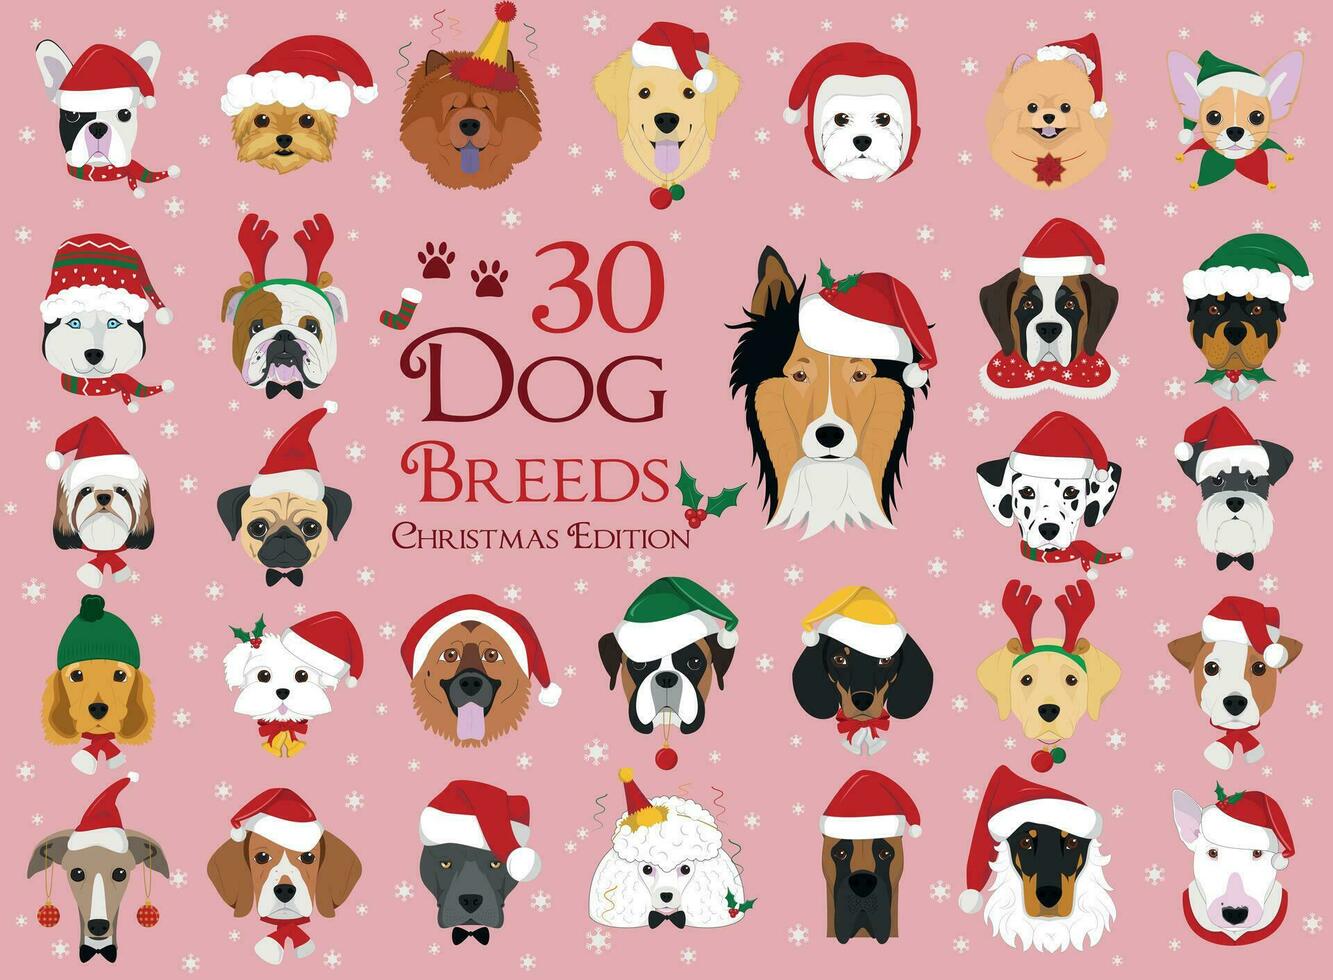 Set of 30 dog breeds with Christmas and winter themes vector